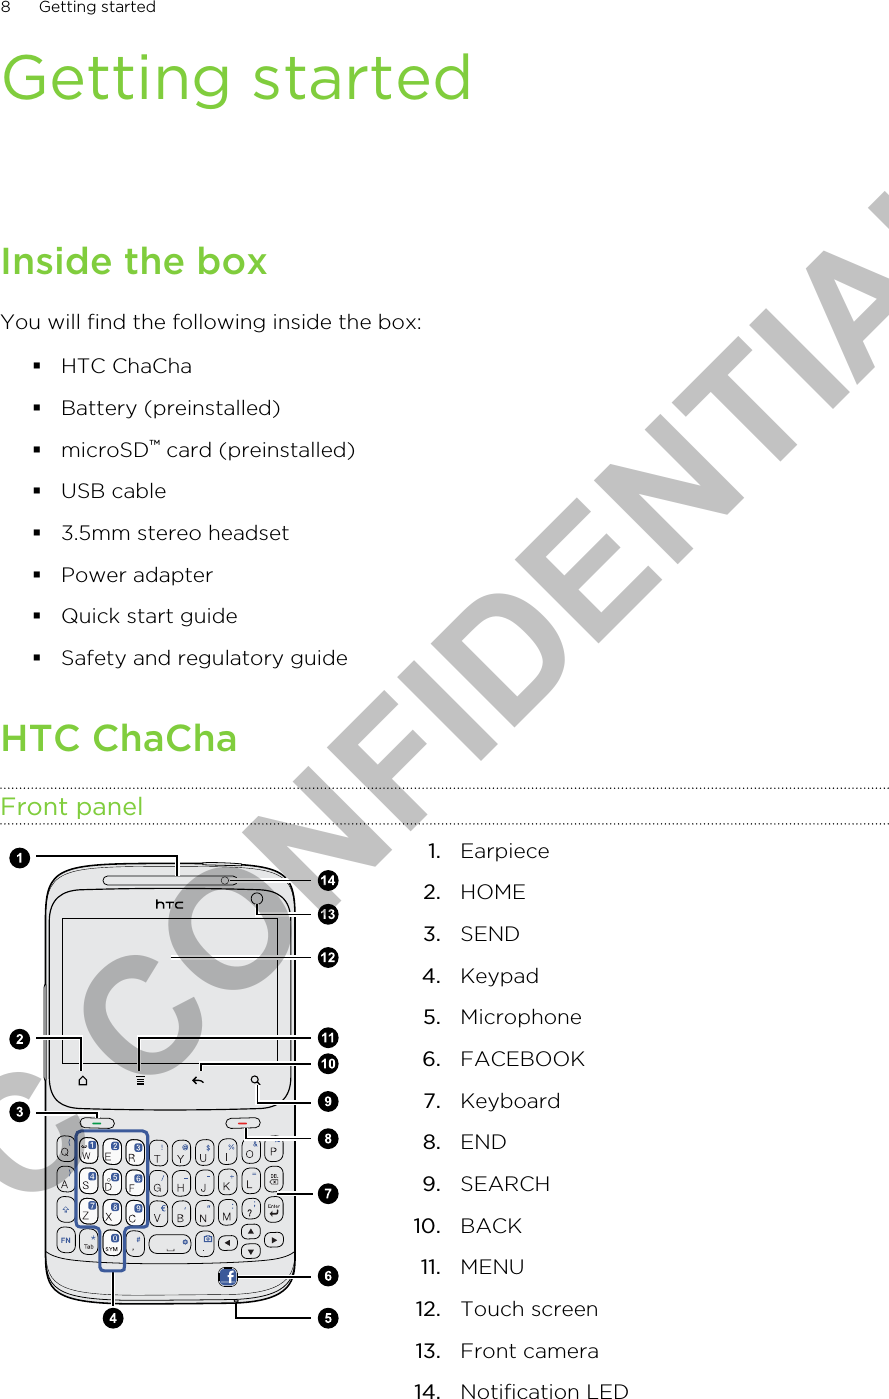 Getting startedInside the boxYou will find the following inside the box:§HTC ChaCha§Battery (preinstalled)§microSD™ card (preinstalled)§USB cable§3.5mm stereo headset§Power adapter§Quick start guide§Safety and regulatory guideHTC ChaChaFront panel1. Earpiece2. HOME3. SEND4. Keypad5. Microphone6. FACEBOOK7. Keyboard8. END9. SEARCH10. BACK11. MENU12. Touch screen13. Front camera14. Notification LED8 Getting startedHTC CONFIDENTIAL